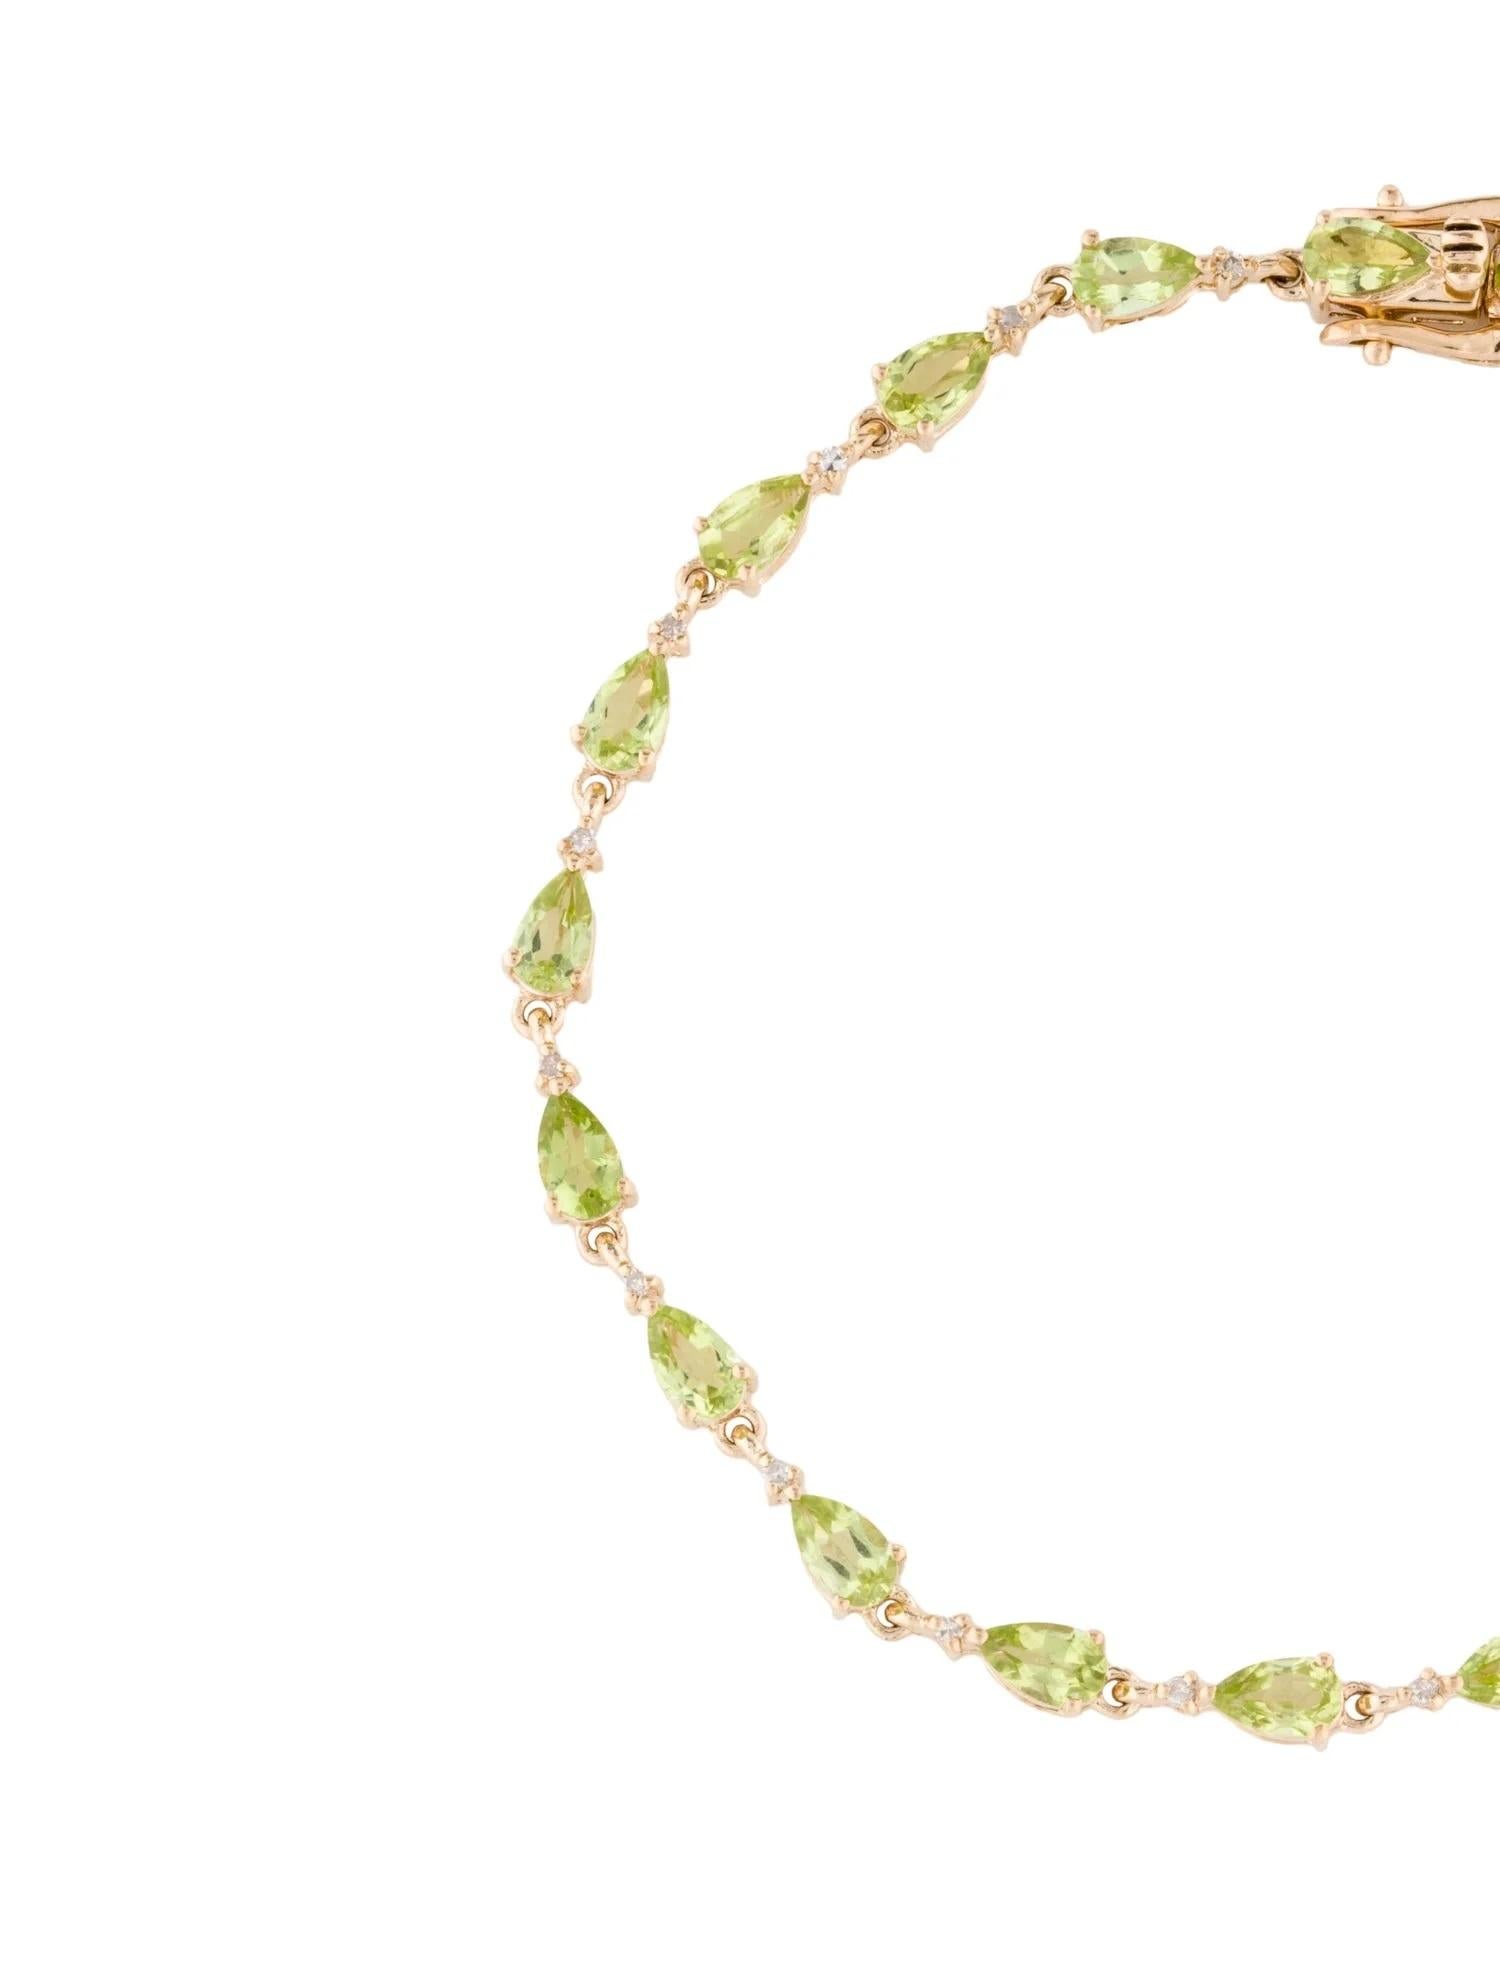 Add a touch of elegance to your ensemble with this exquisite 14K yellow gold link bracelet, adorned with 4.35 carats of pear modified brilliant peridot gemstones and 0.14 carats of near colorless single cut diamonds. Crafted with precision and